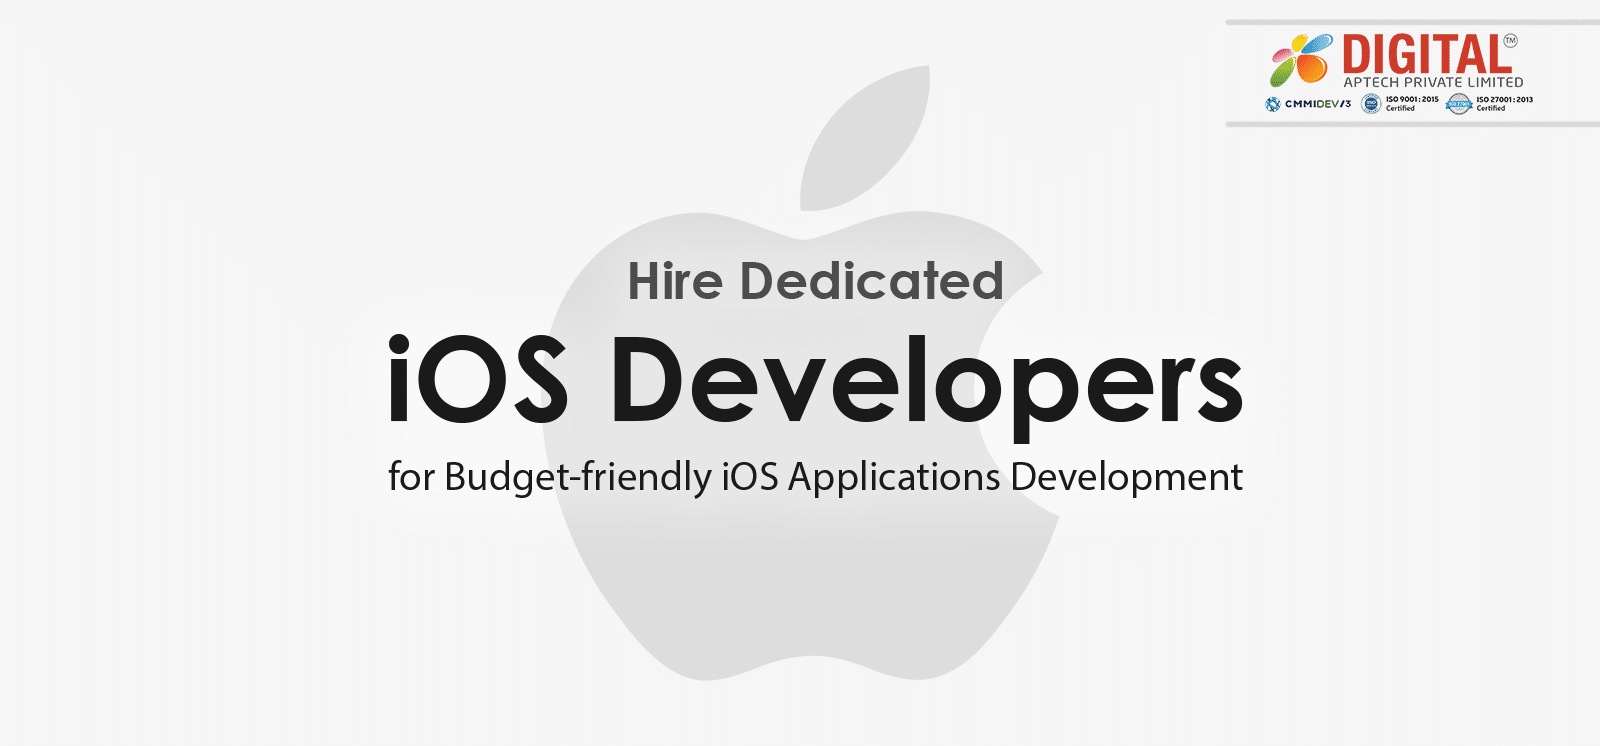 Hire Dedicated iOS Developers for Budget-friendly iOS Applications Development